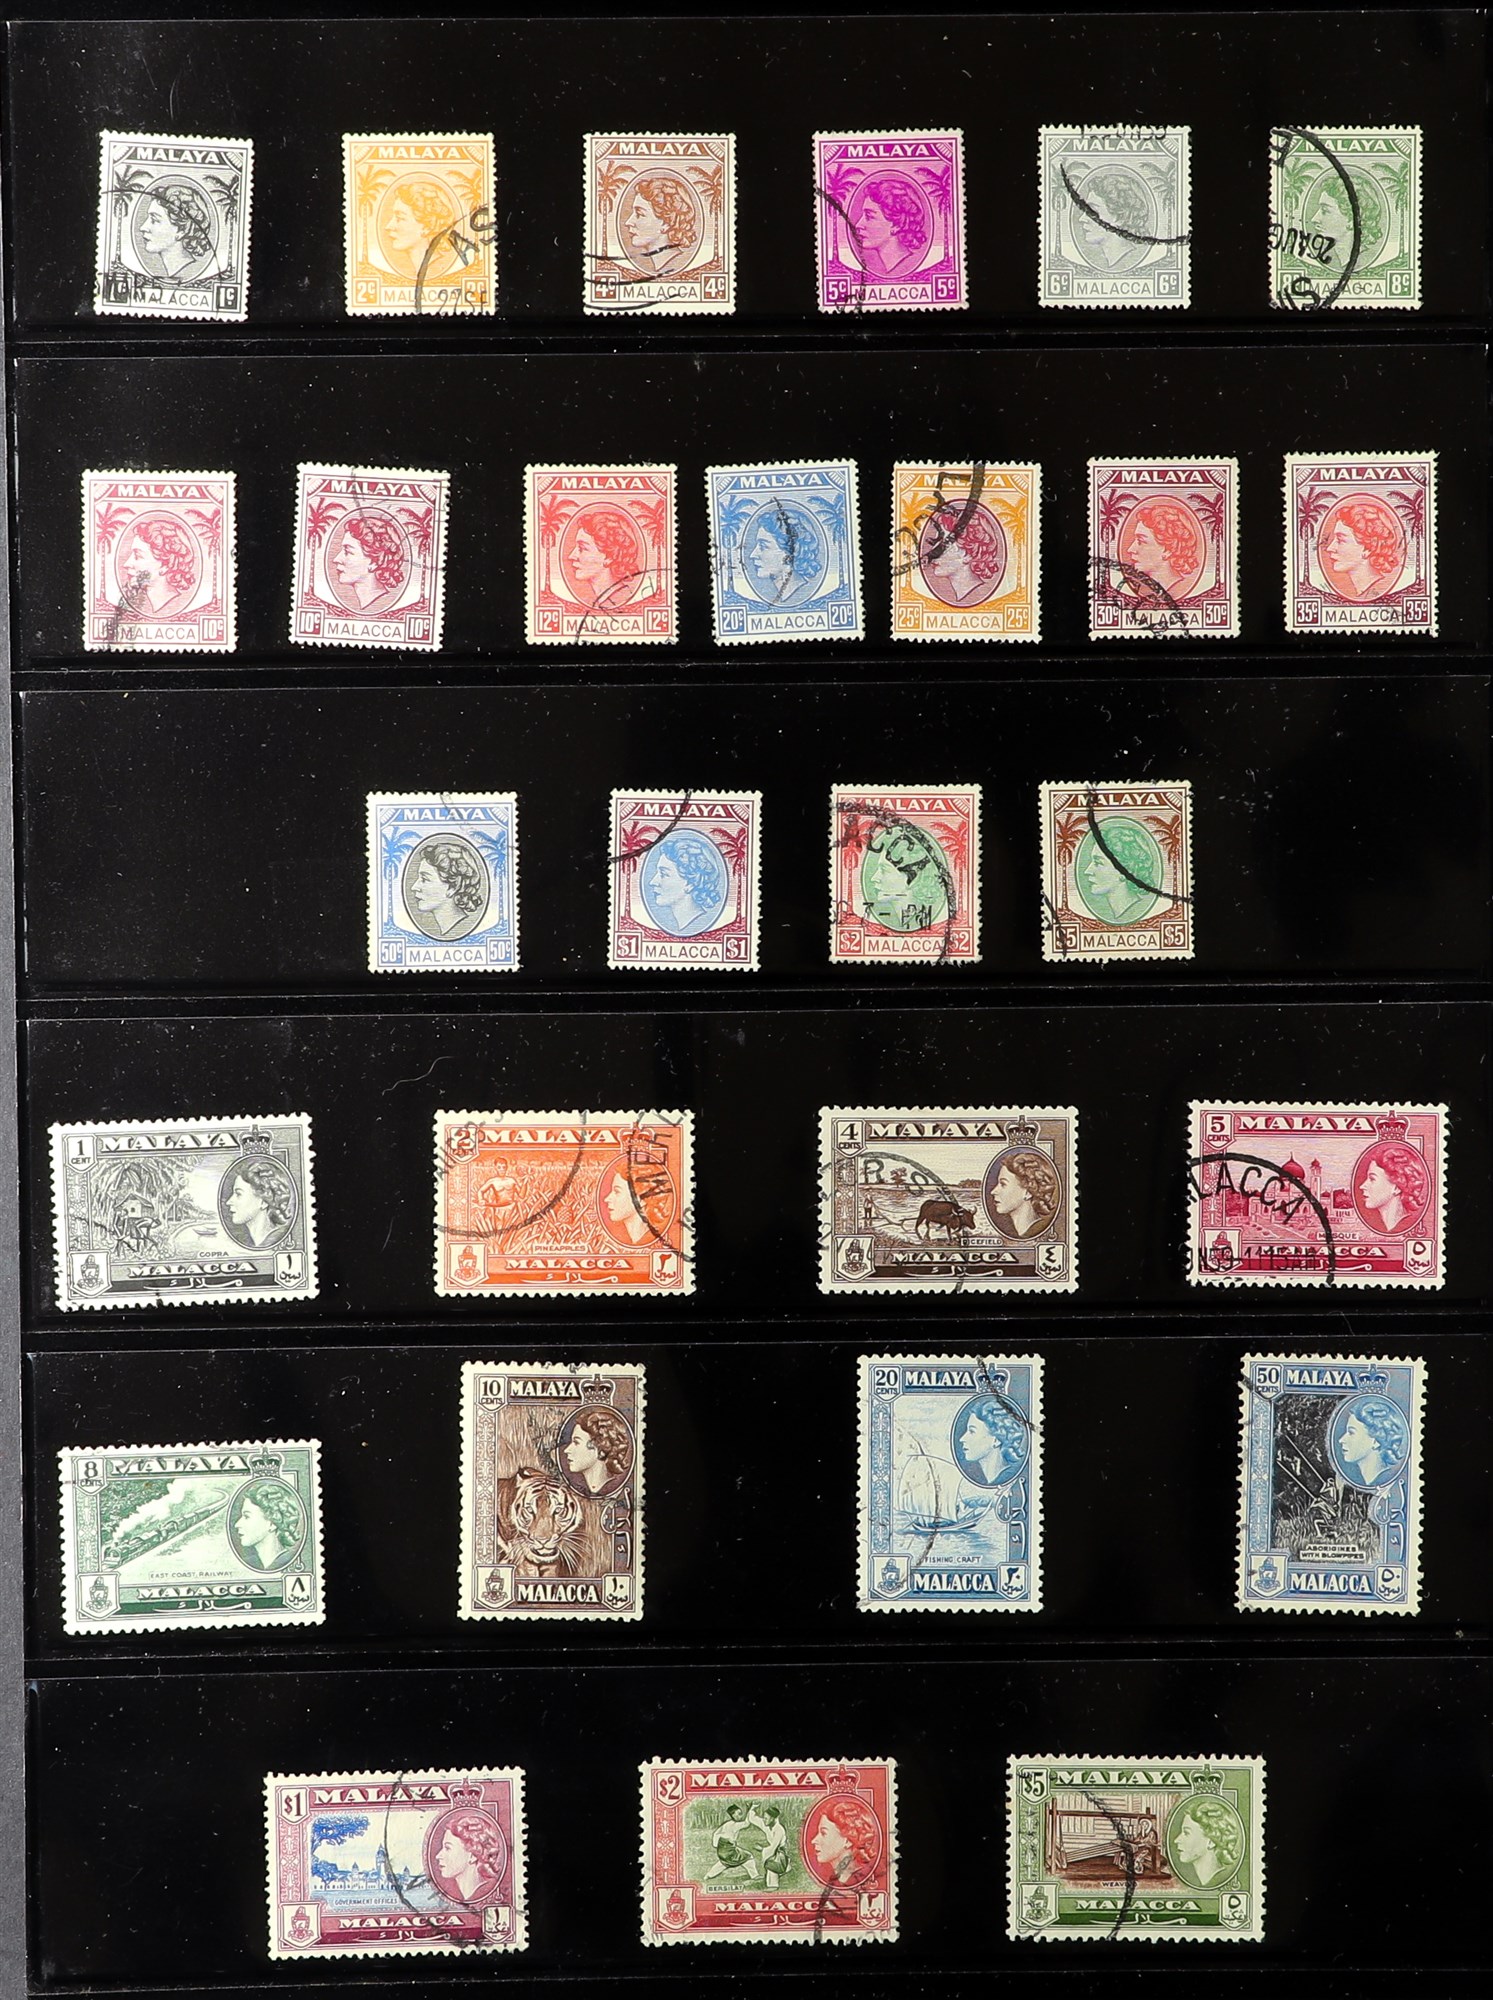 MALAYA STATES MALACCA 1948 - 1968 complete collection of used stamps from 1948 Wedding to 1965 - Image 2 of 3